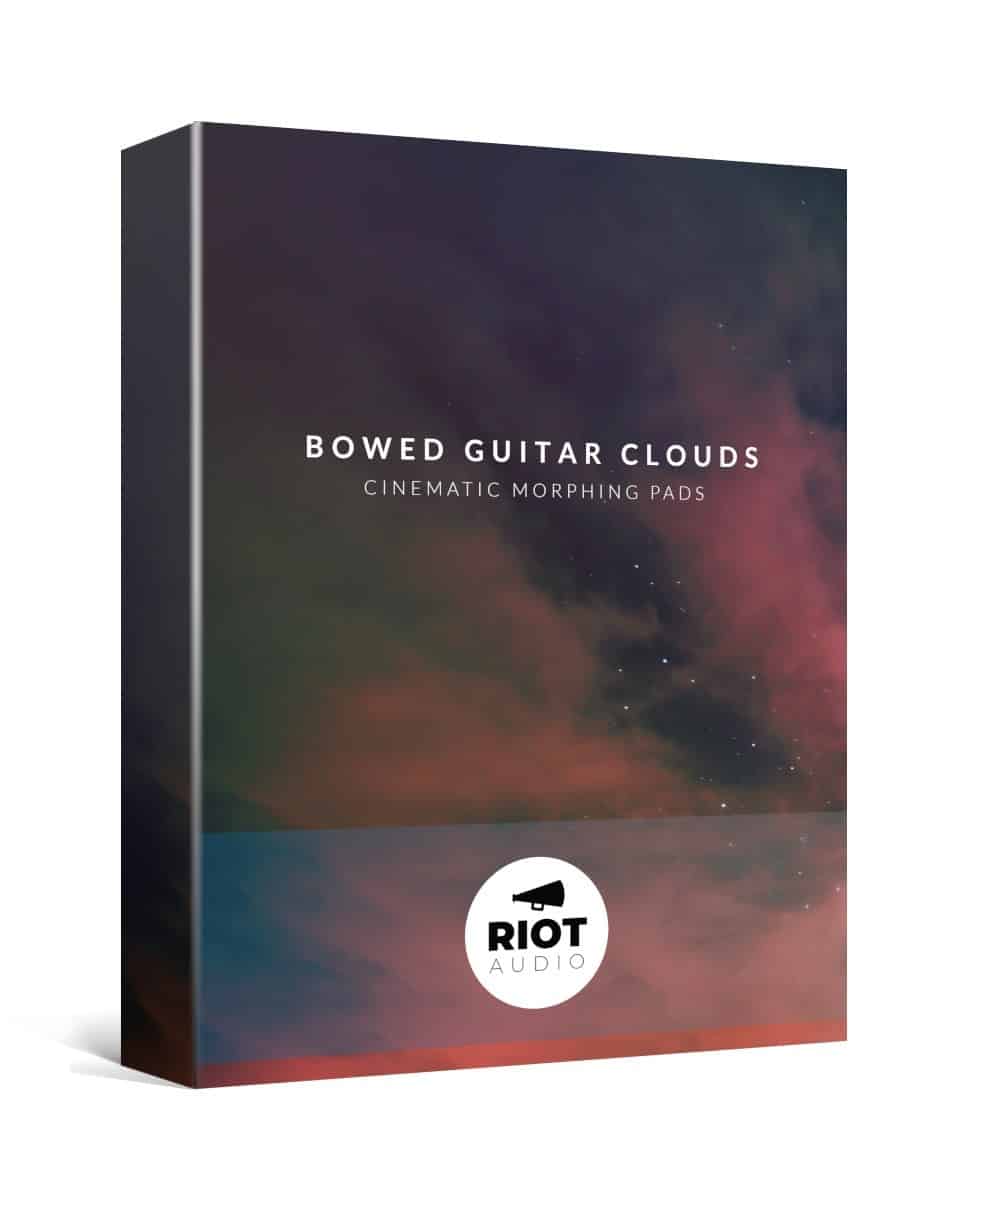 BOWED GUITAR CLOUDS Cinematic Morphing Pads